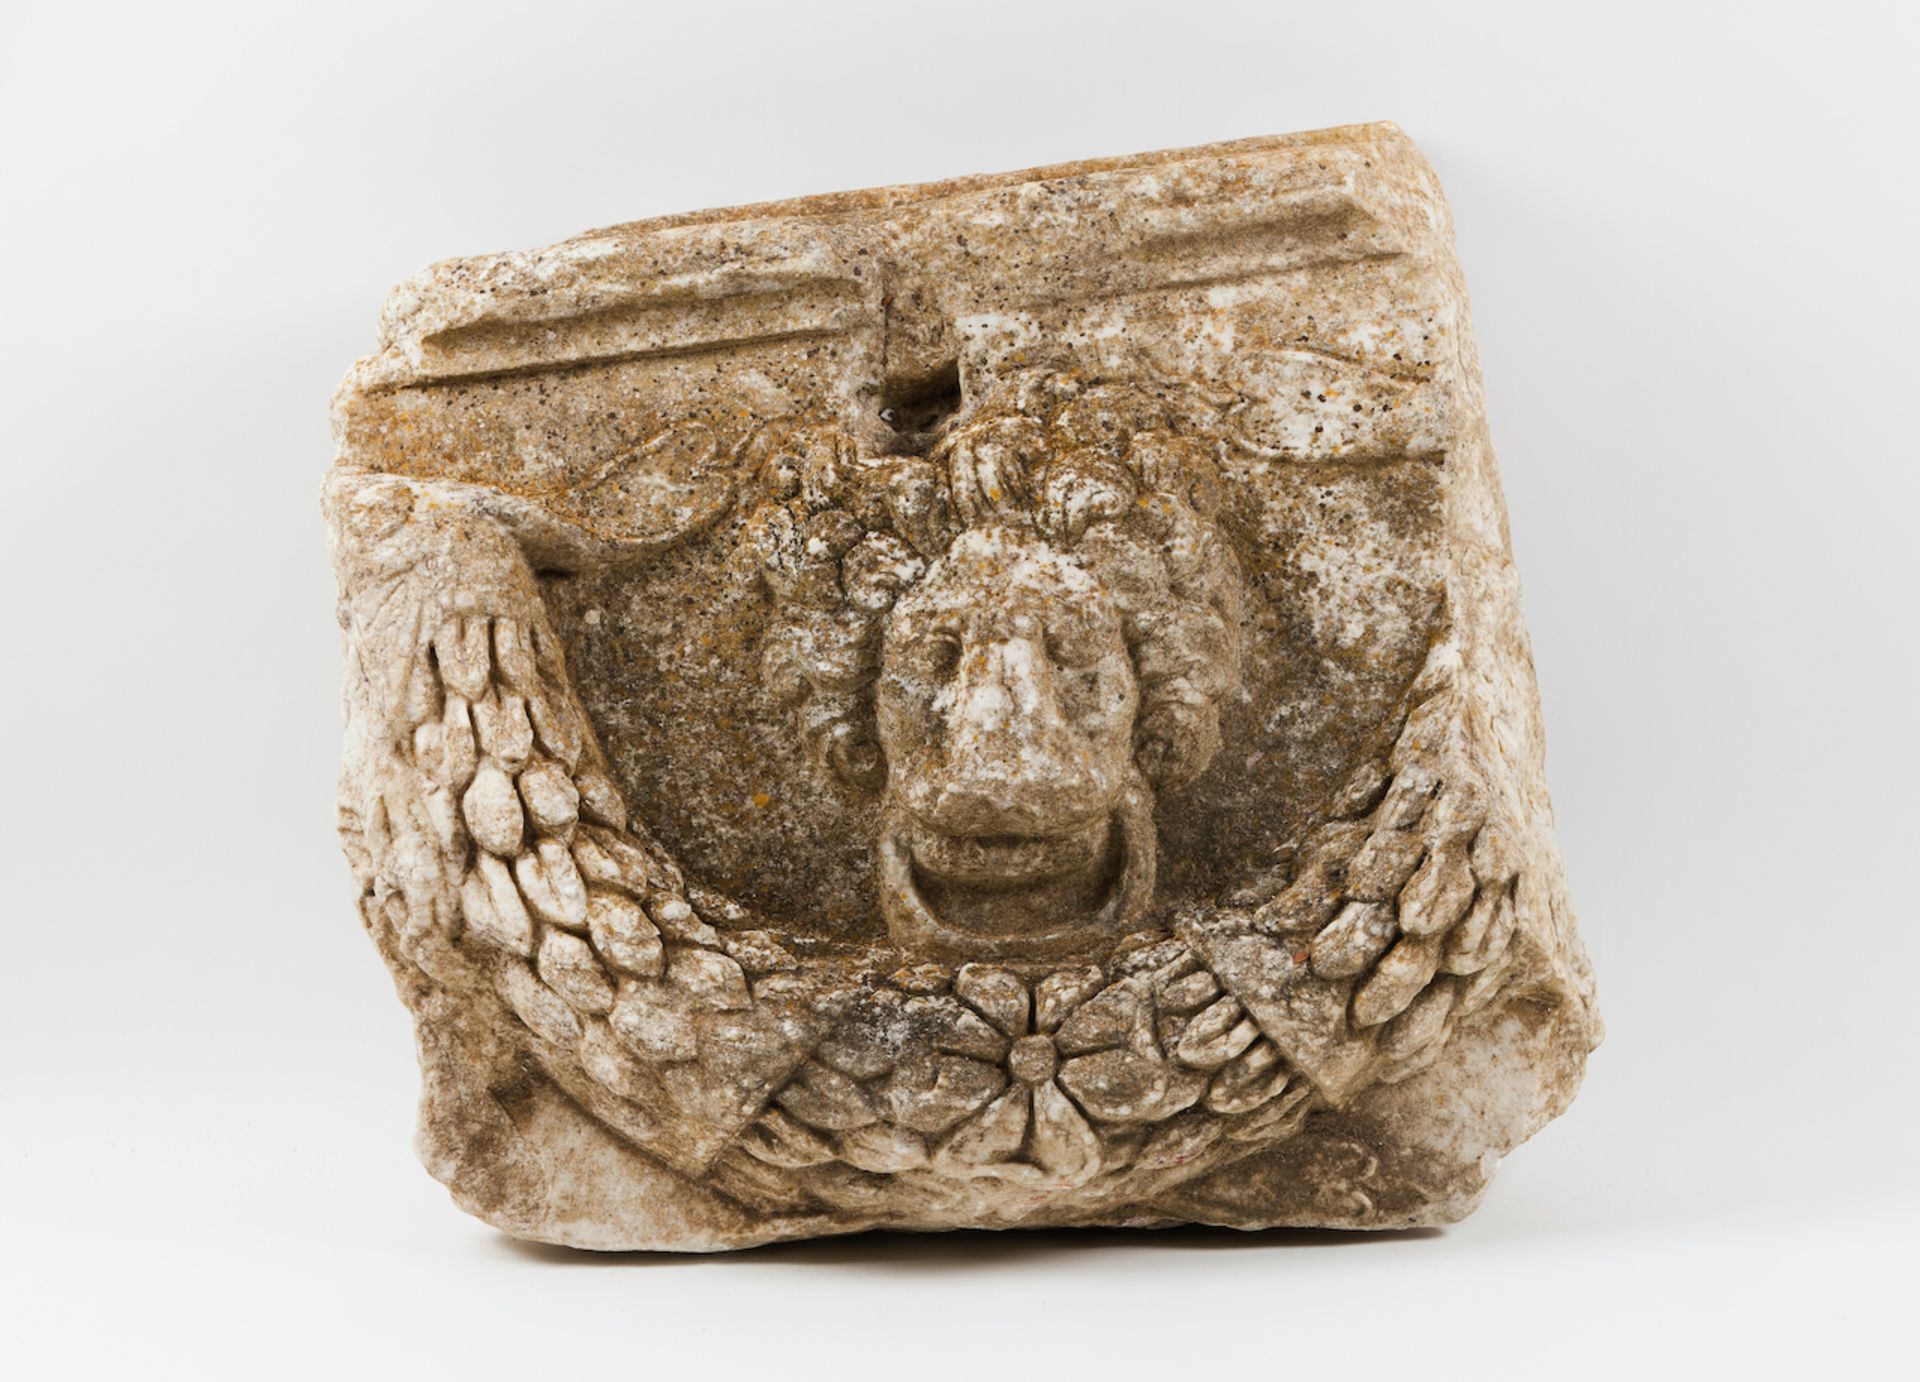 A carved stone fragmentMarbleLow-relief decoration of lion's head with ring and laurel wreath60x66